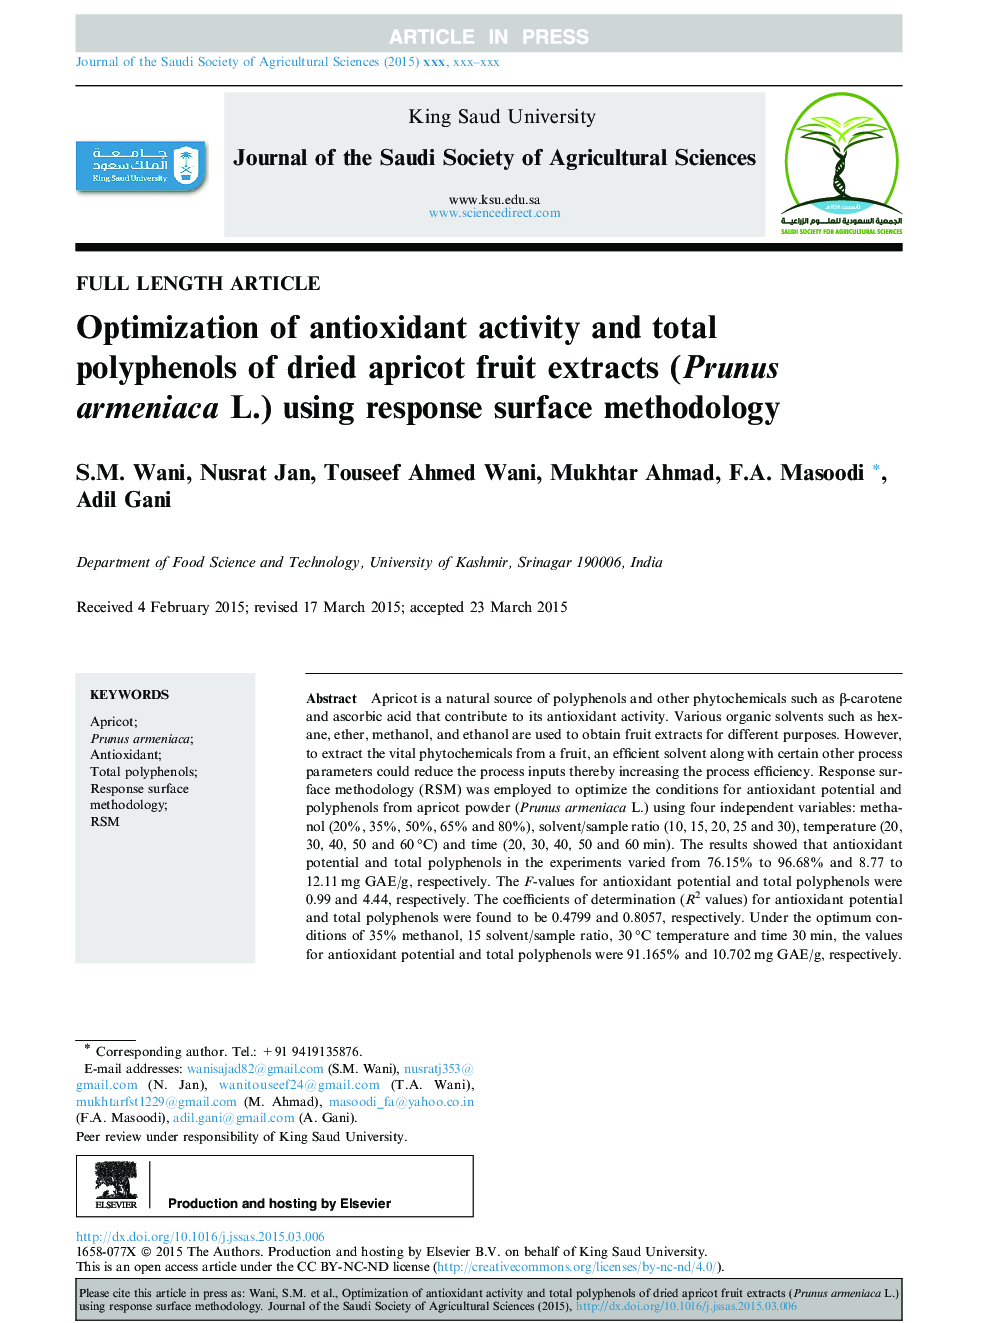 Optimization of antioxidant activity and total polyphenols of dried apricot fruit extracts (Prunus armeniaca L.) using response surface methodology